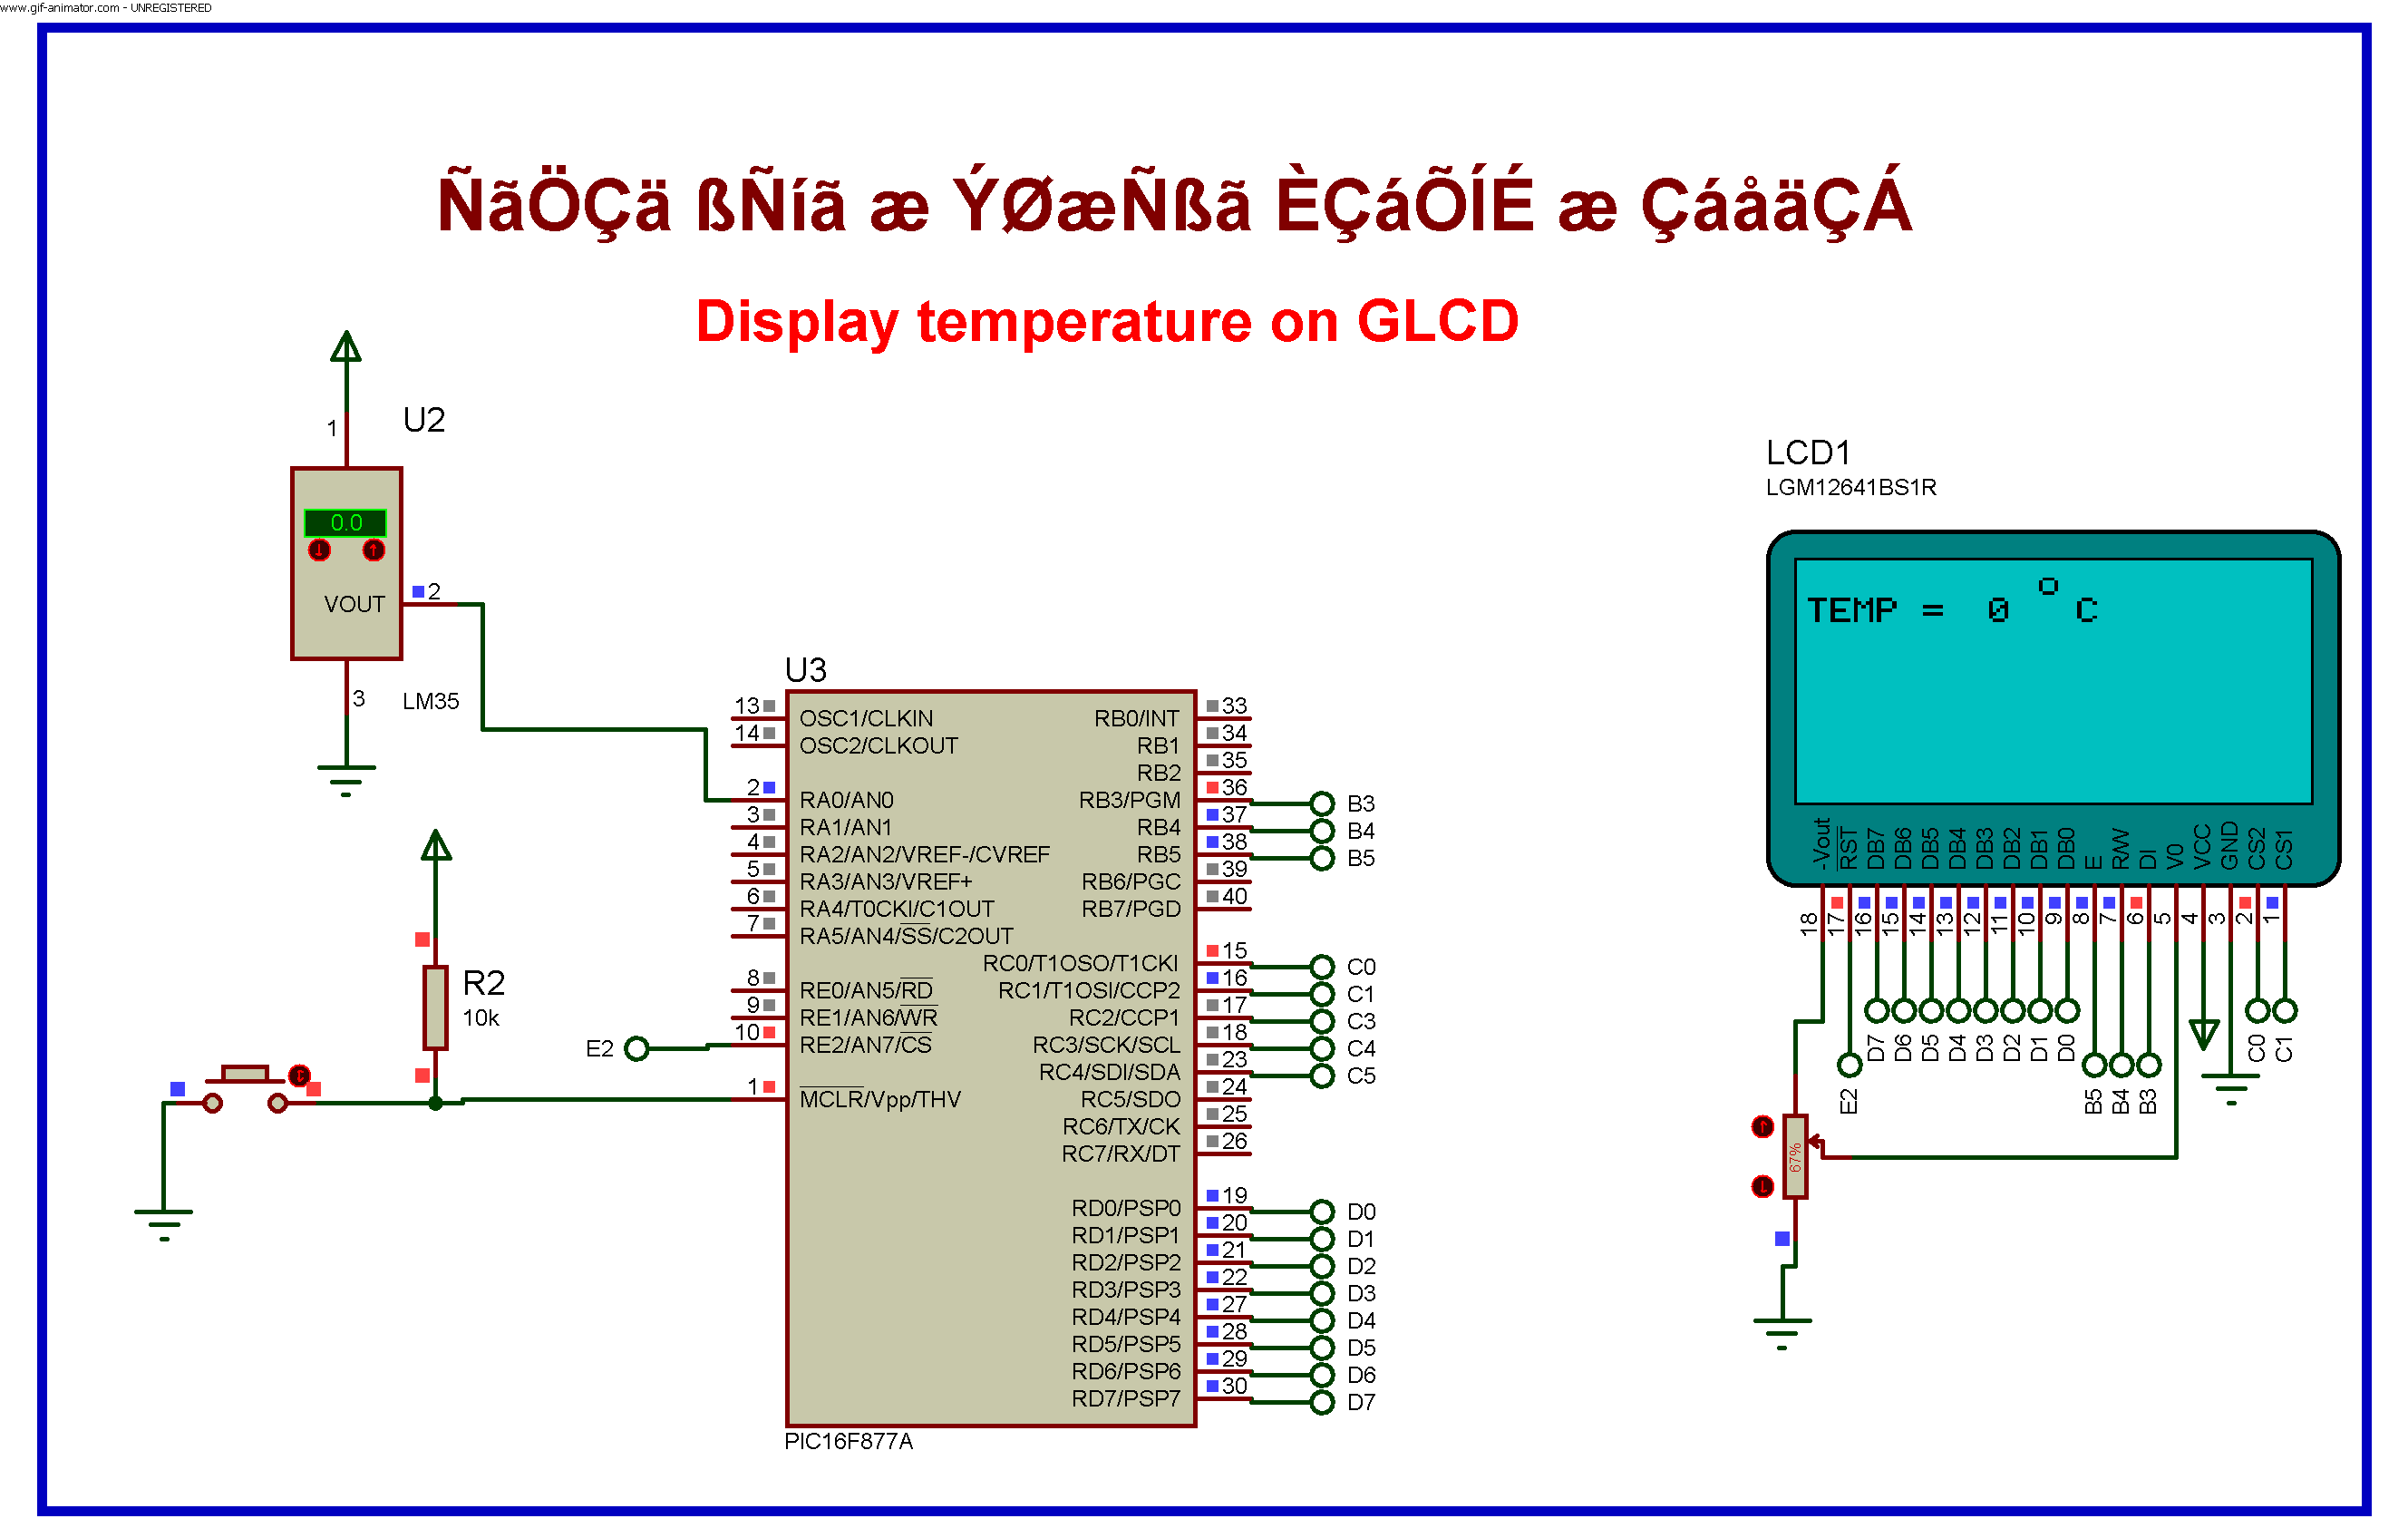 Display temperature on Graphic Liquid Crystal Display using PIC16F877A microcontroller explained